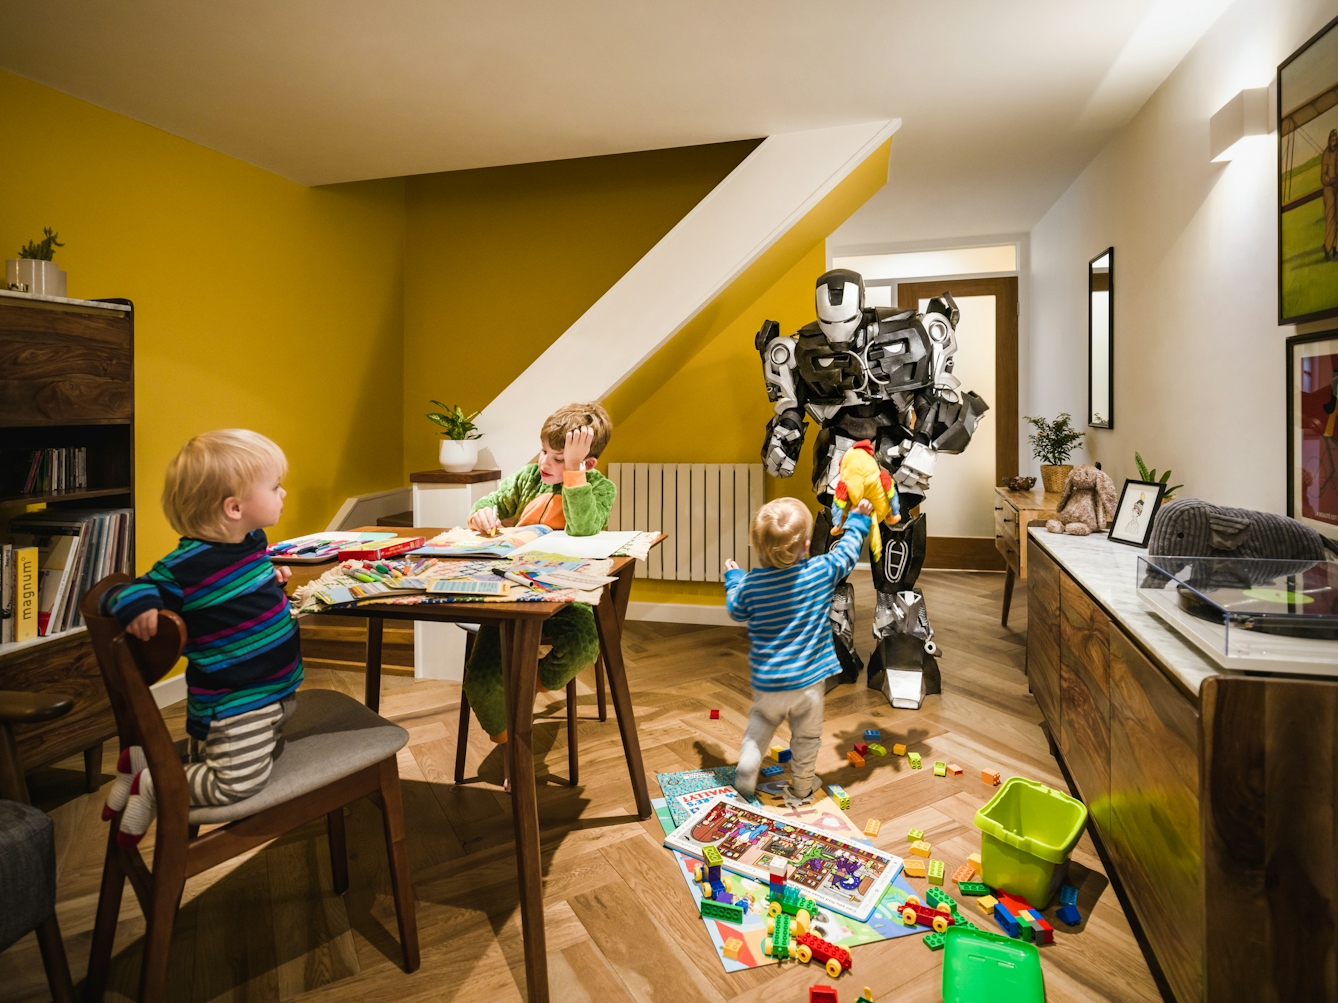 Photograph of a living room with two small toddlers and an older boy playing with puzzles, bricks and colouring books. In the background is a large robot bending down to receive a soft toy that now of the toddlers is handing it.